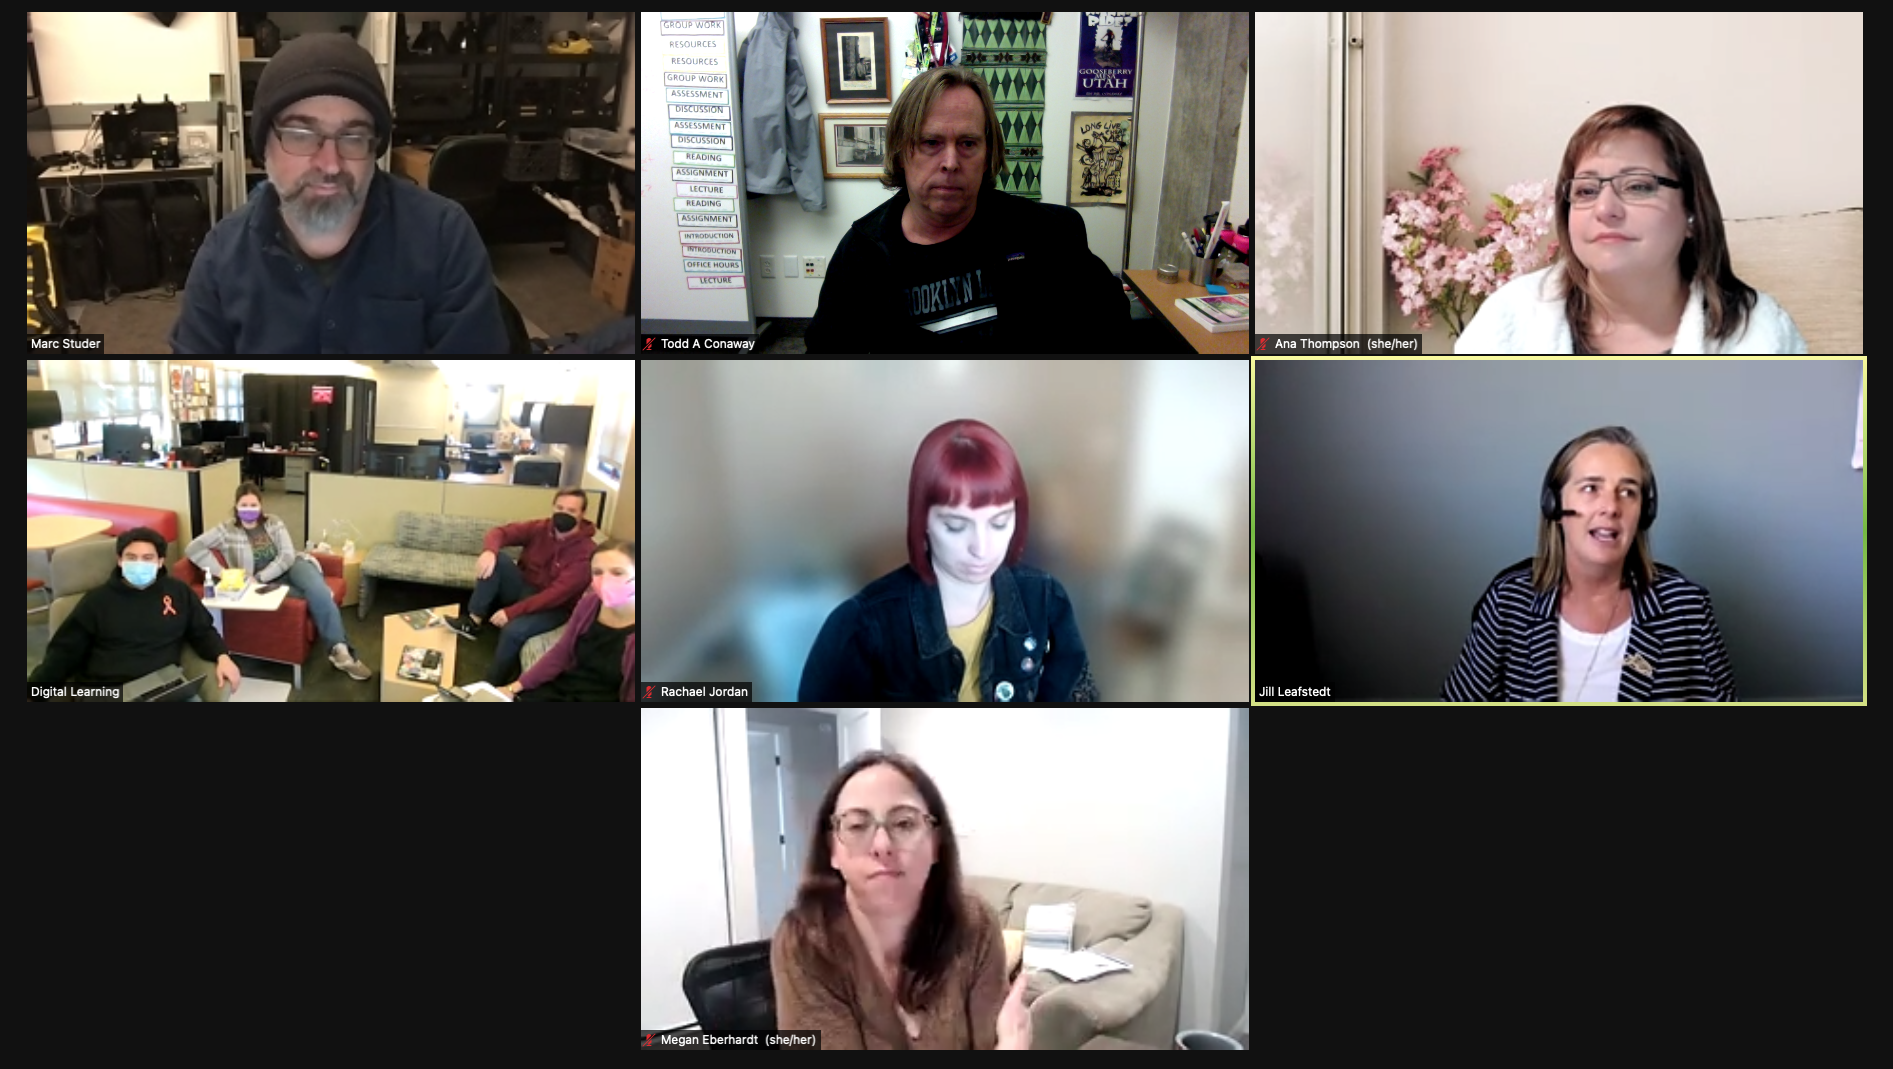 Zoom meeting with multiple paricipants